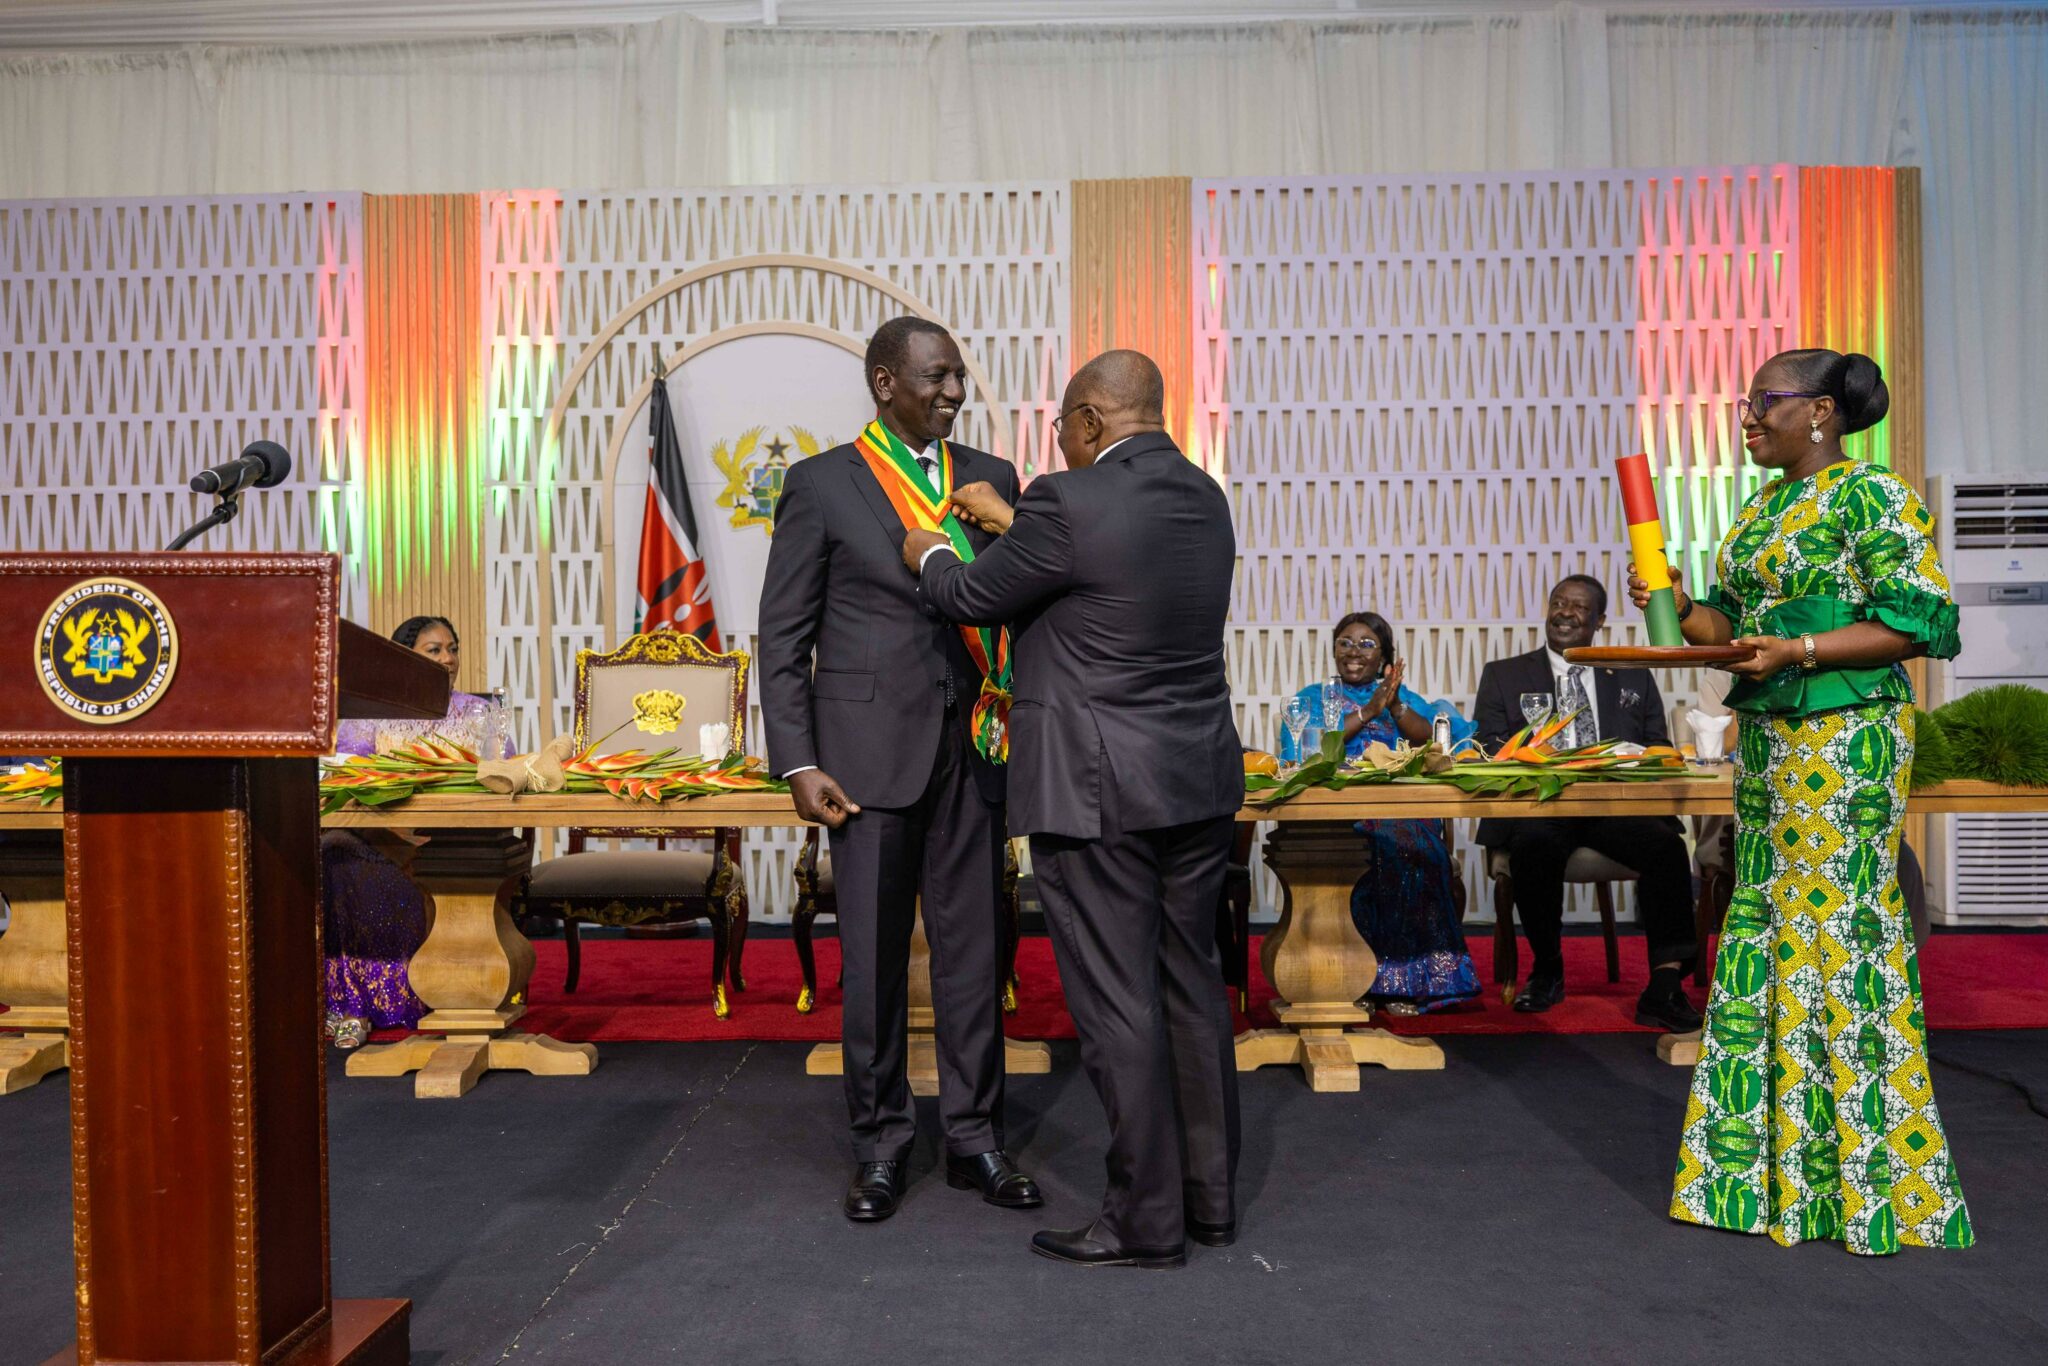 President William Ruto conferred with the Companion of the Order of the Star of the Volta award in Ghana.